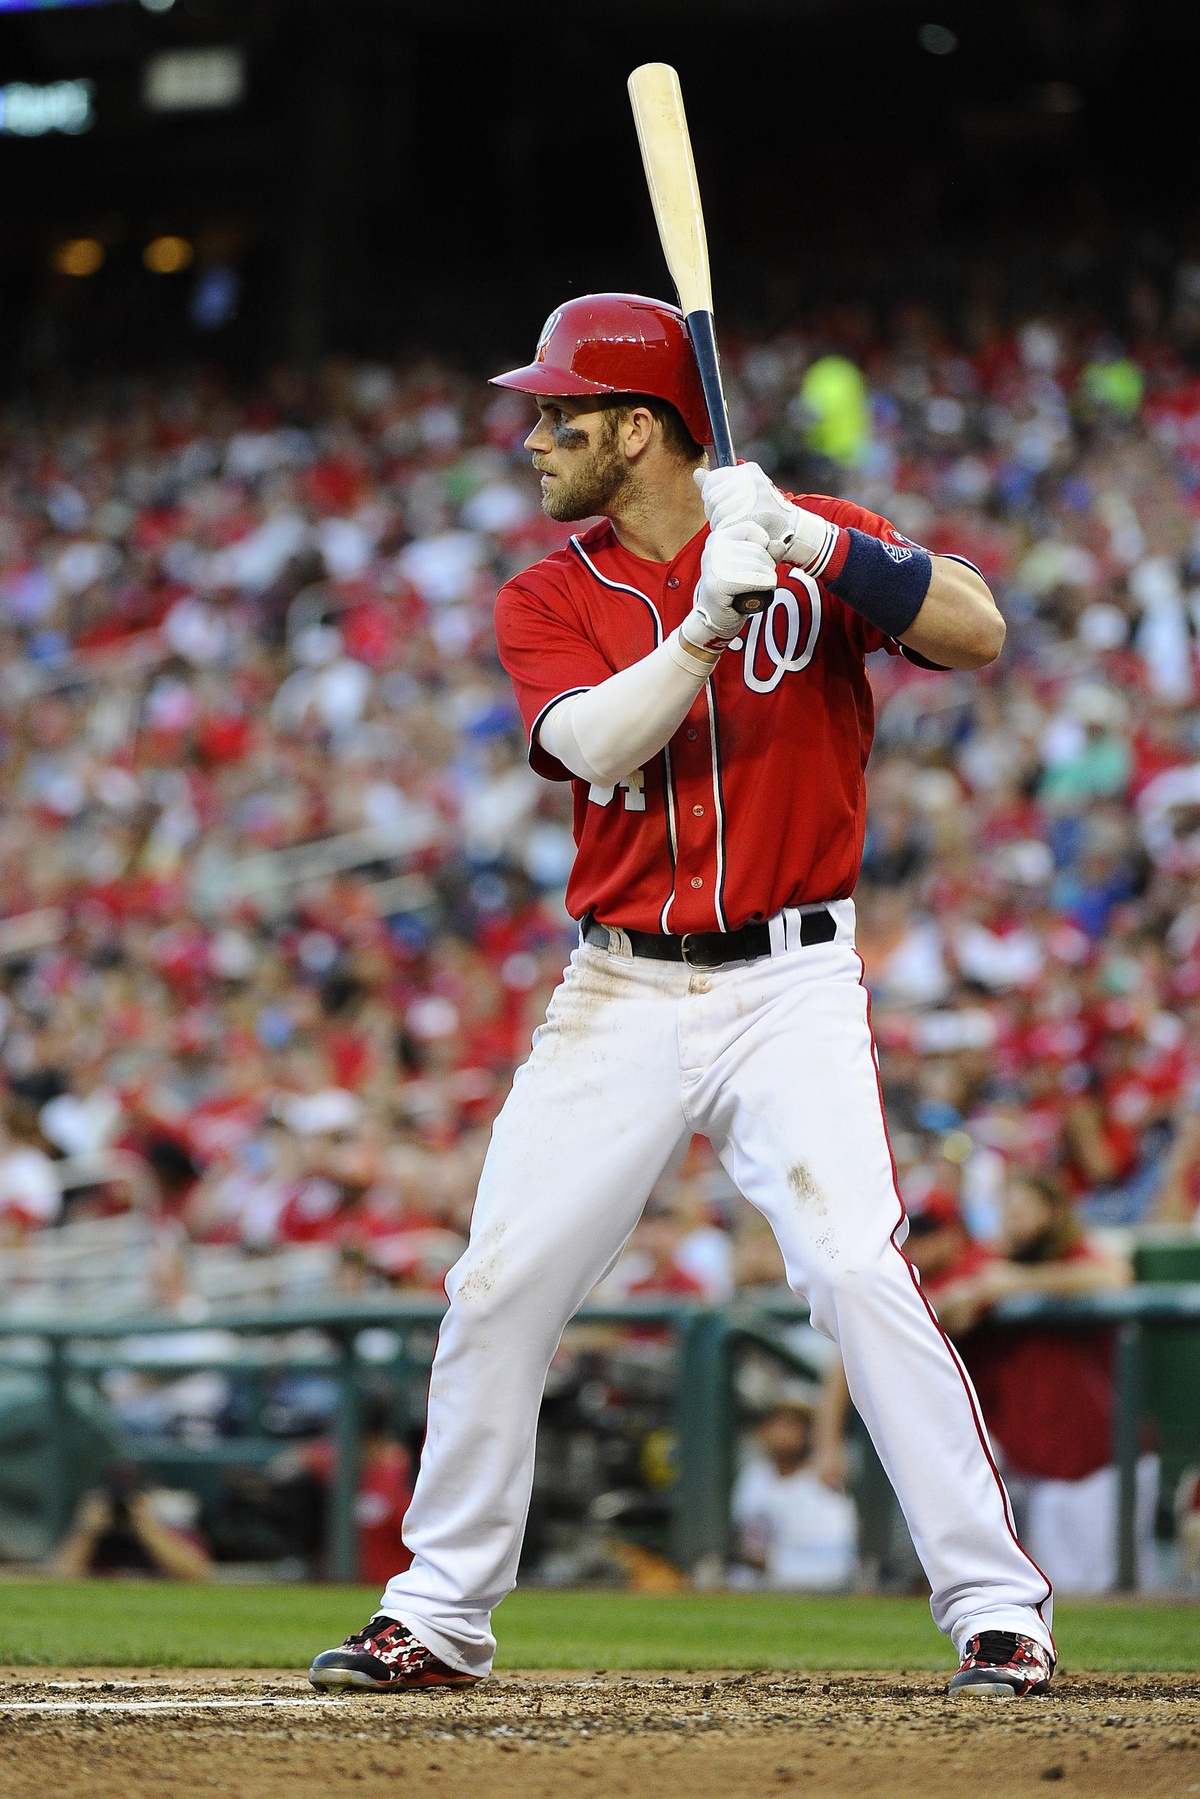 Report: Bryce Harper, Nats agree to 2-year deal